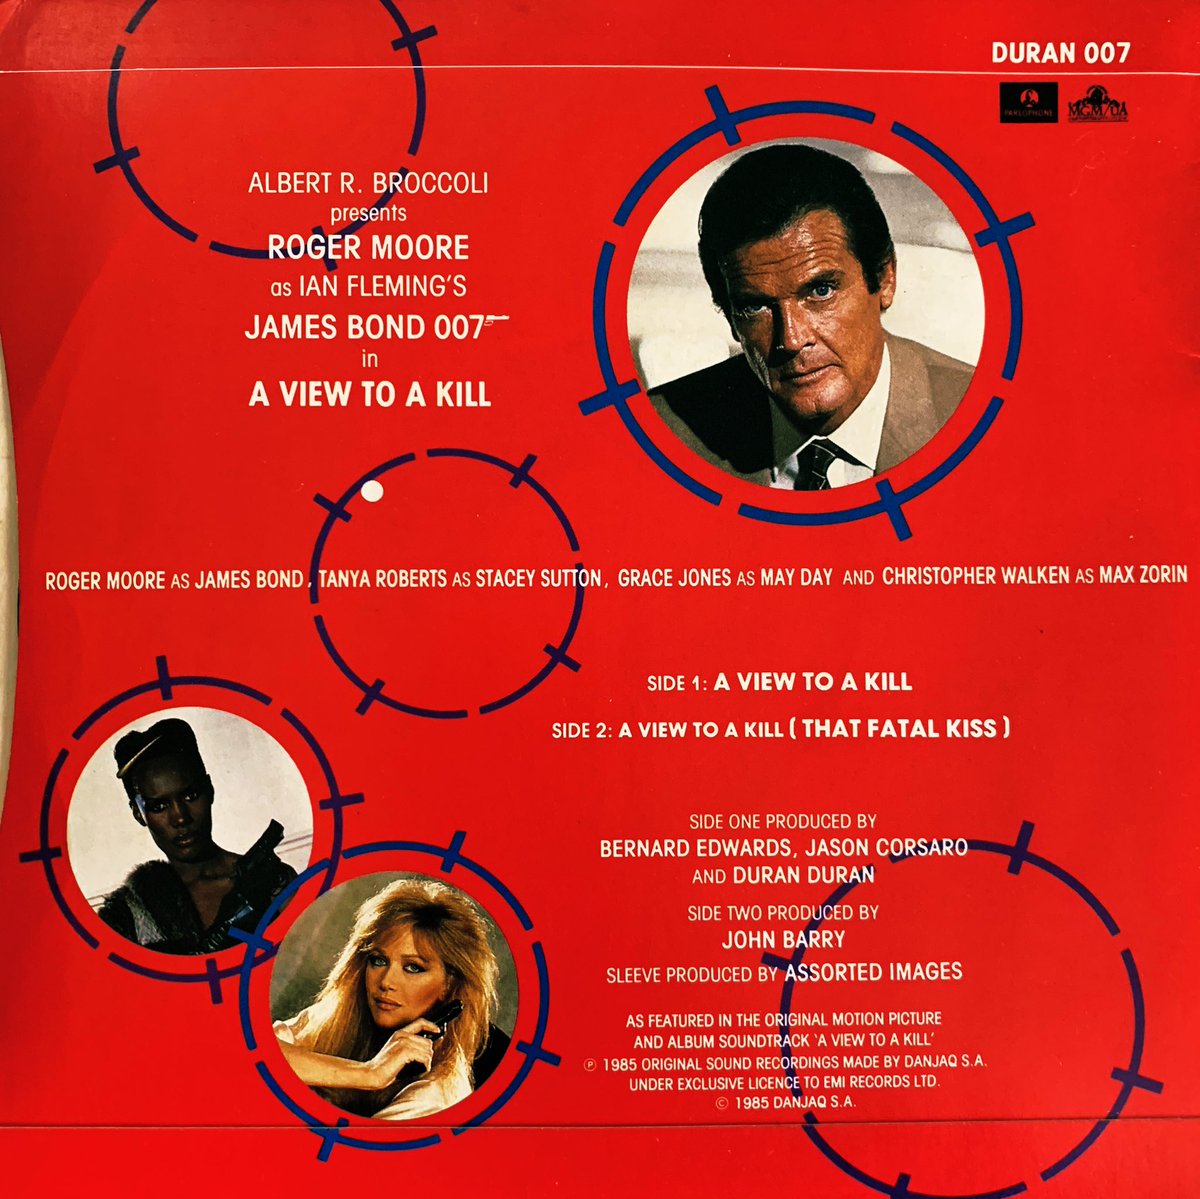 Raccoon Nowplaying Duran Duran A View To A Kill 1985 Released 06may85 Uk Chart Peak 02 My Favourite Bond Song Movie Grace Jones As